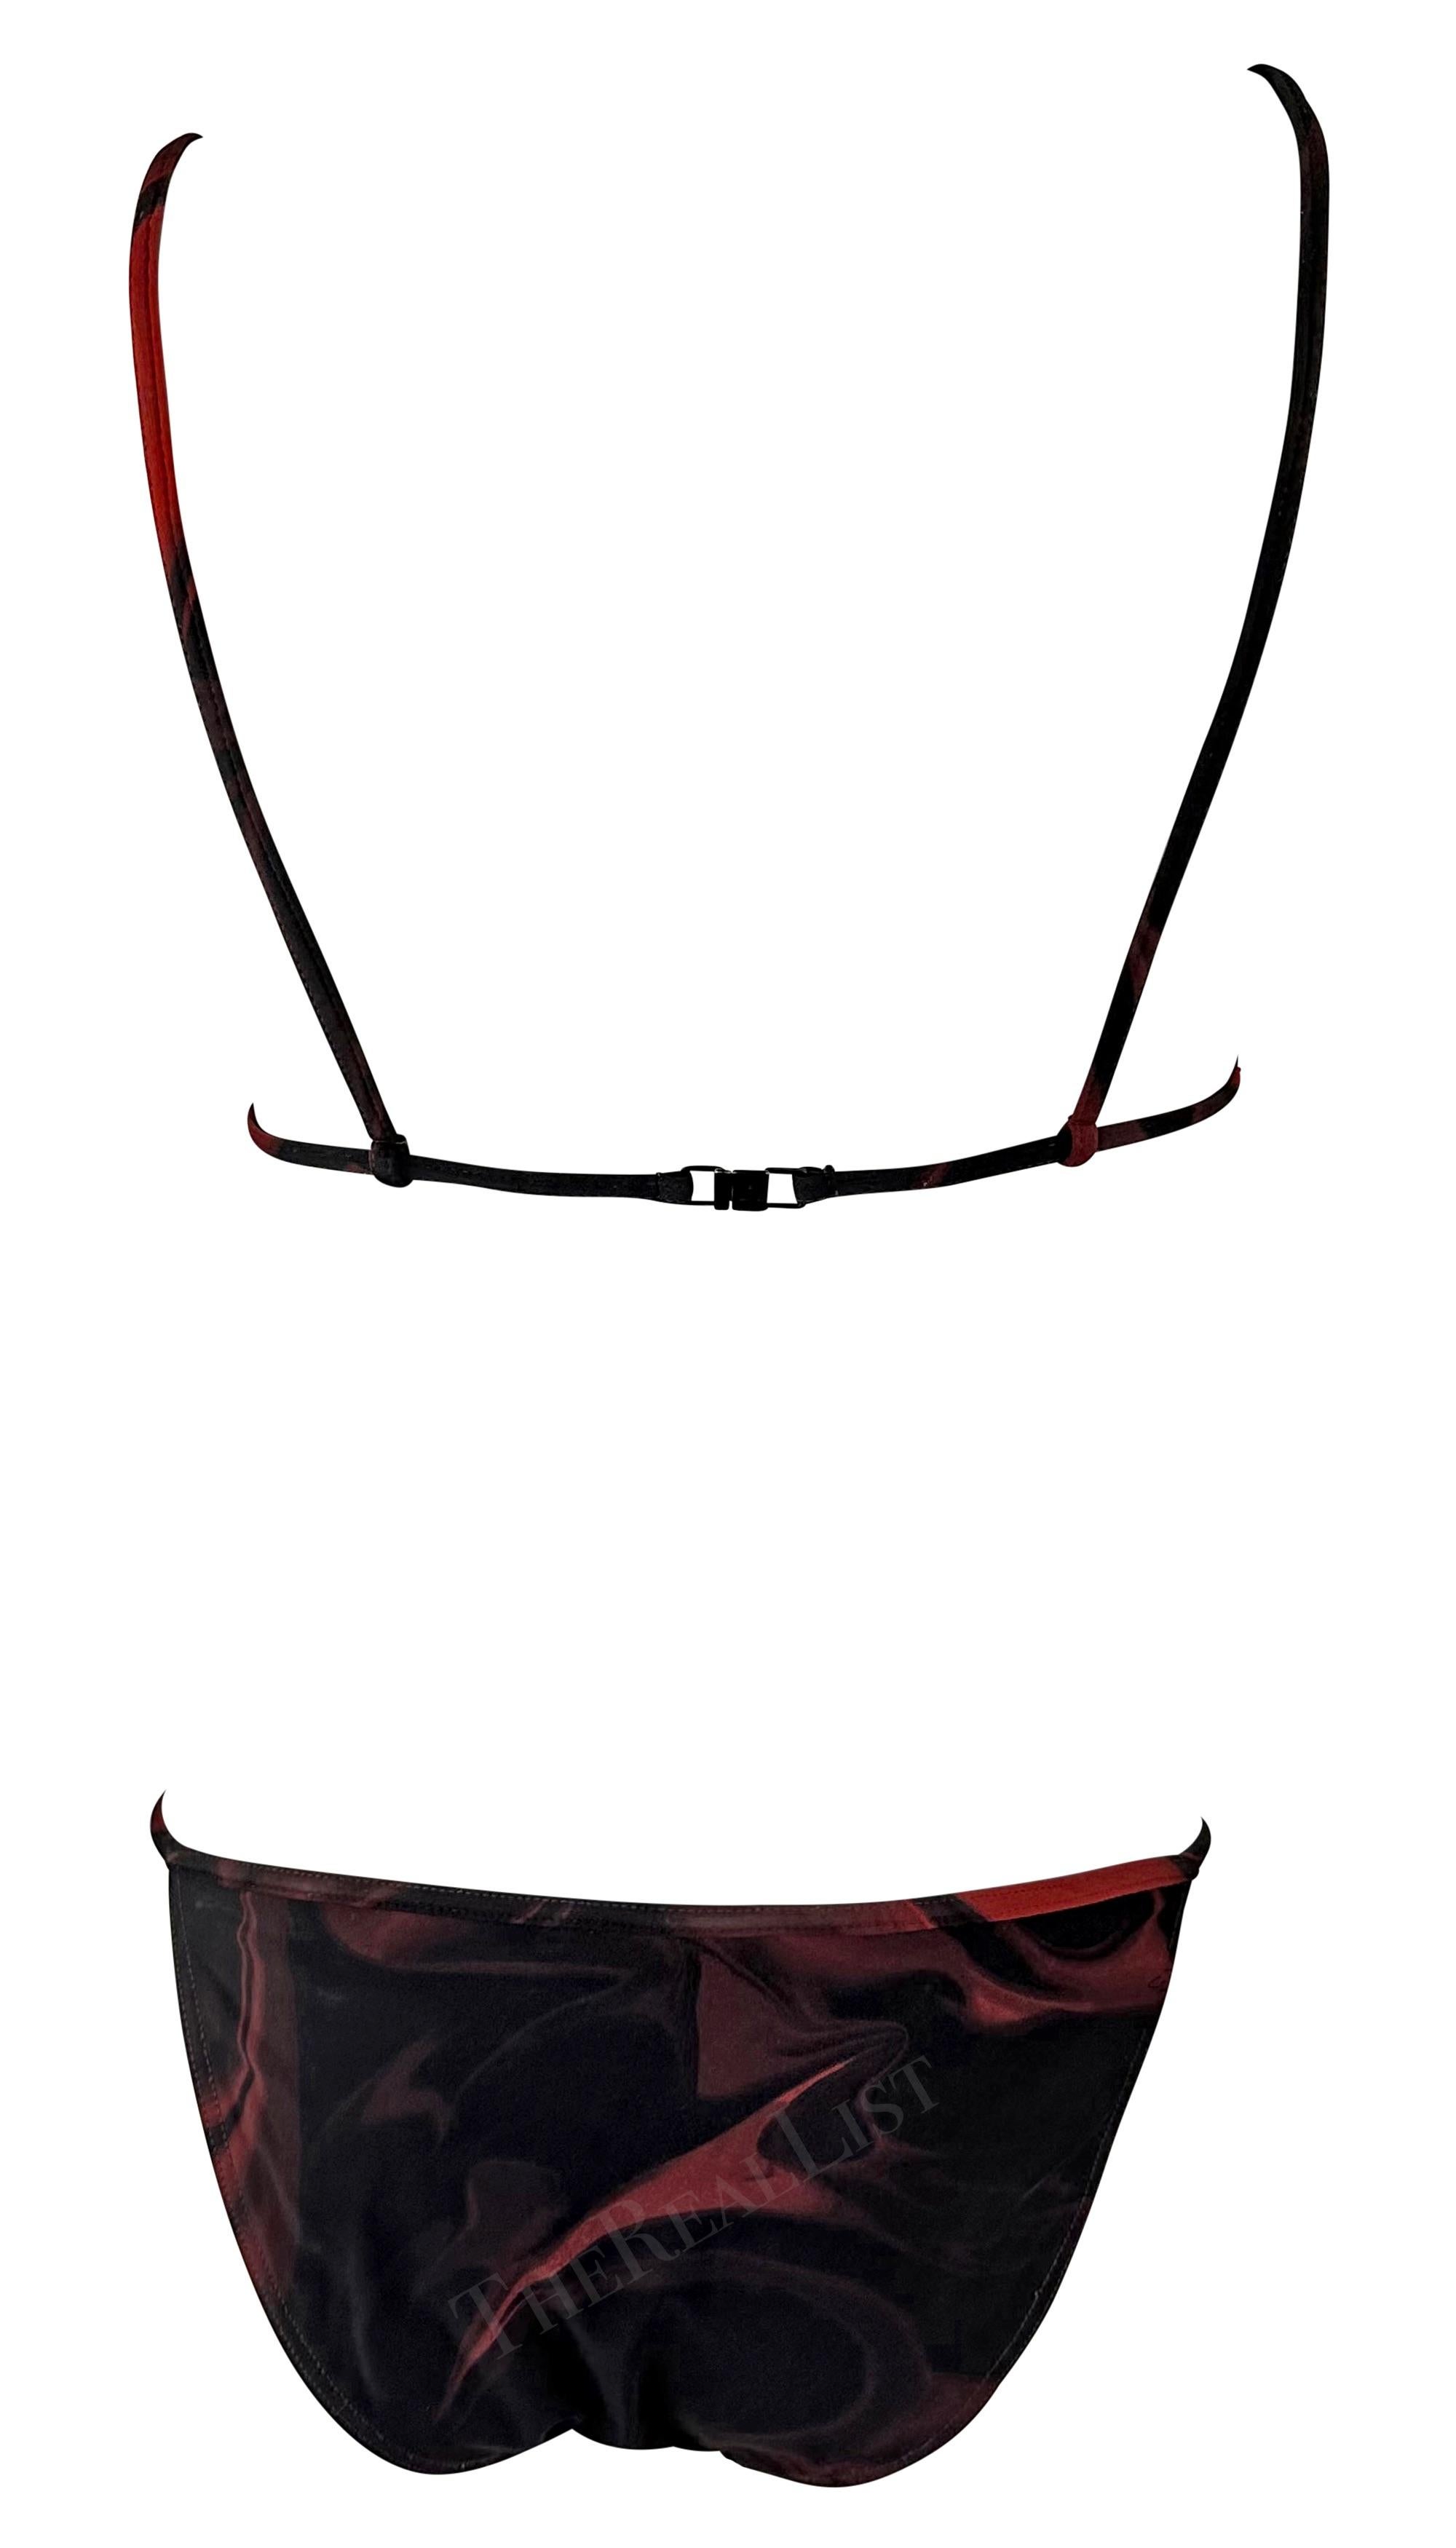 S/S 2001 Gucci by Tom Ford Black Red Magma Print Logo Buckle Bikini Two-Piece For Sale 2